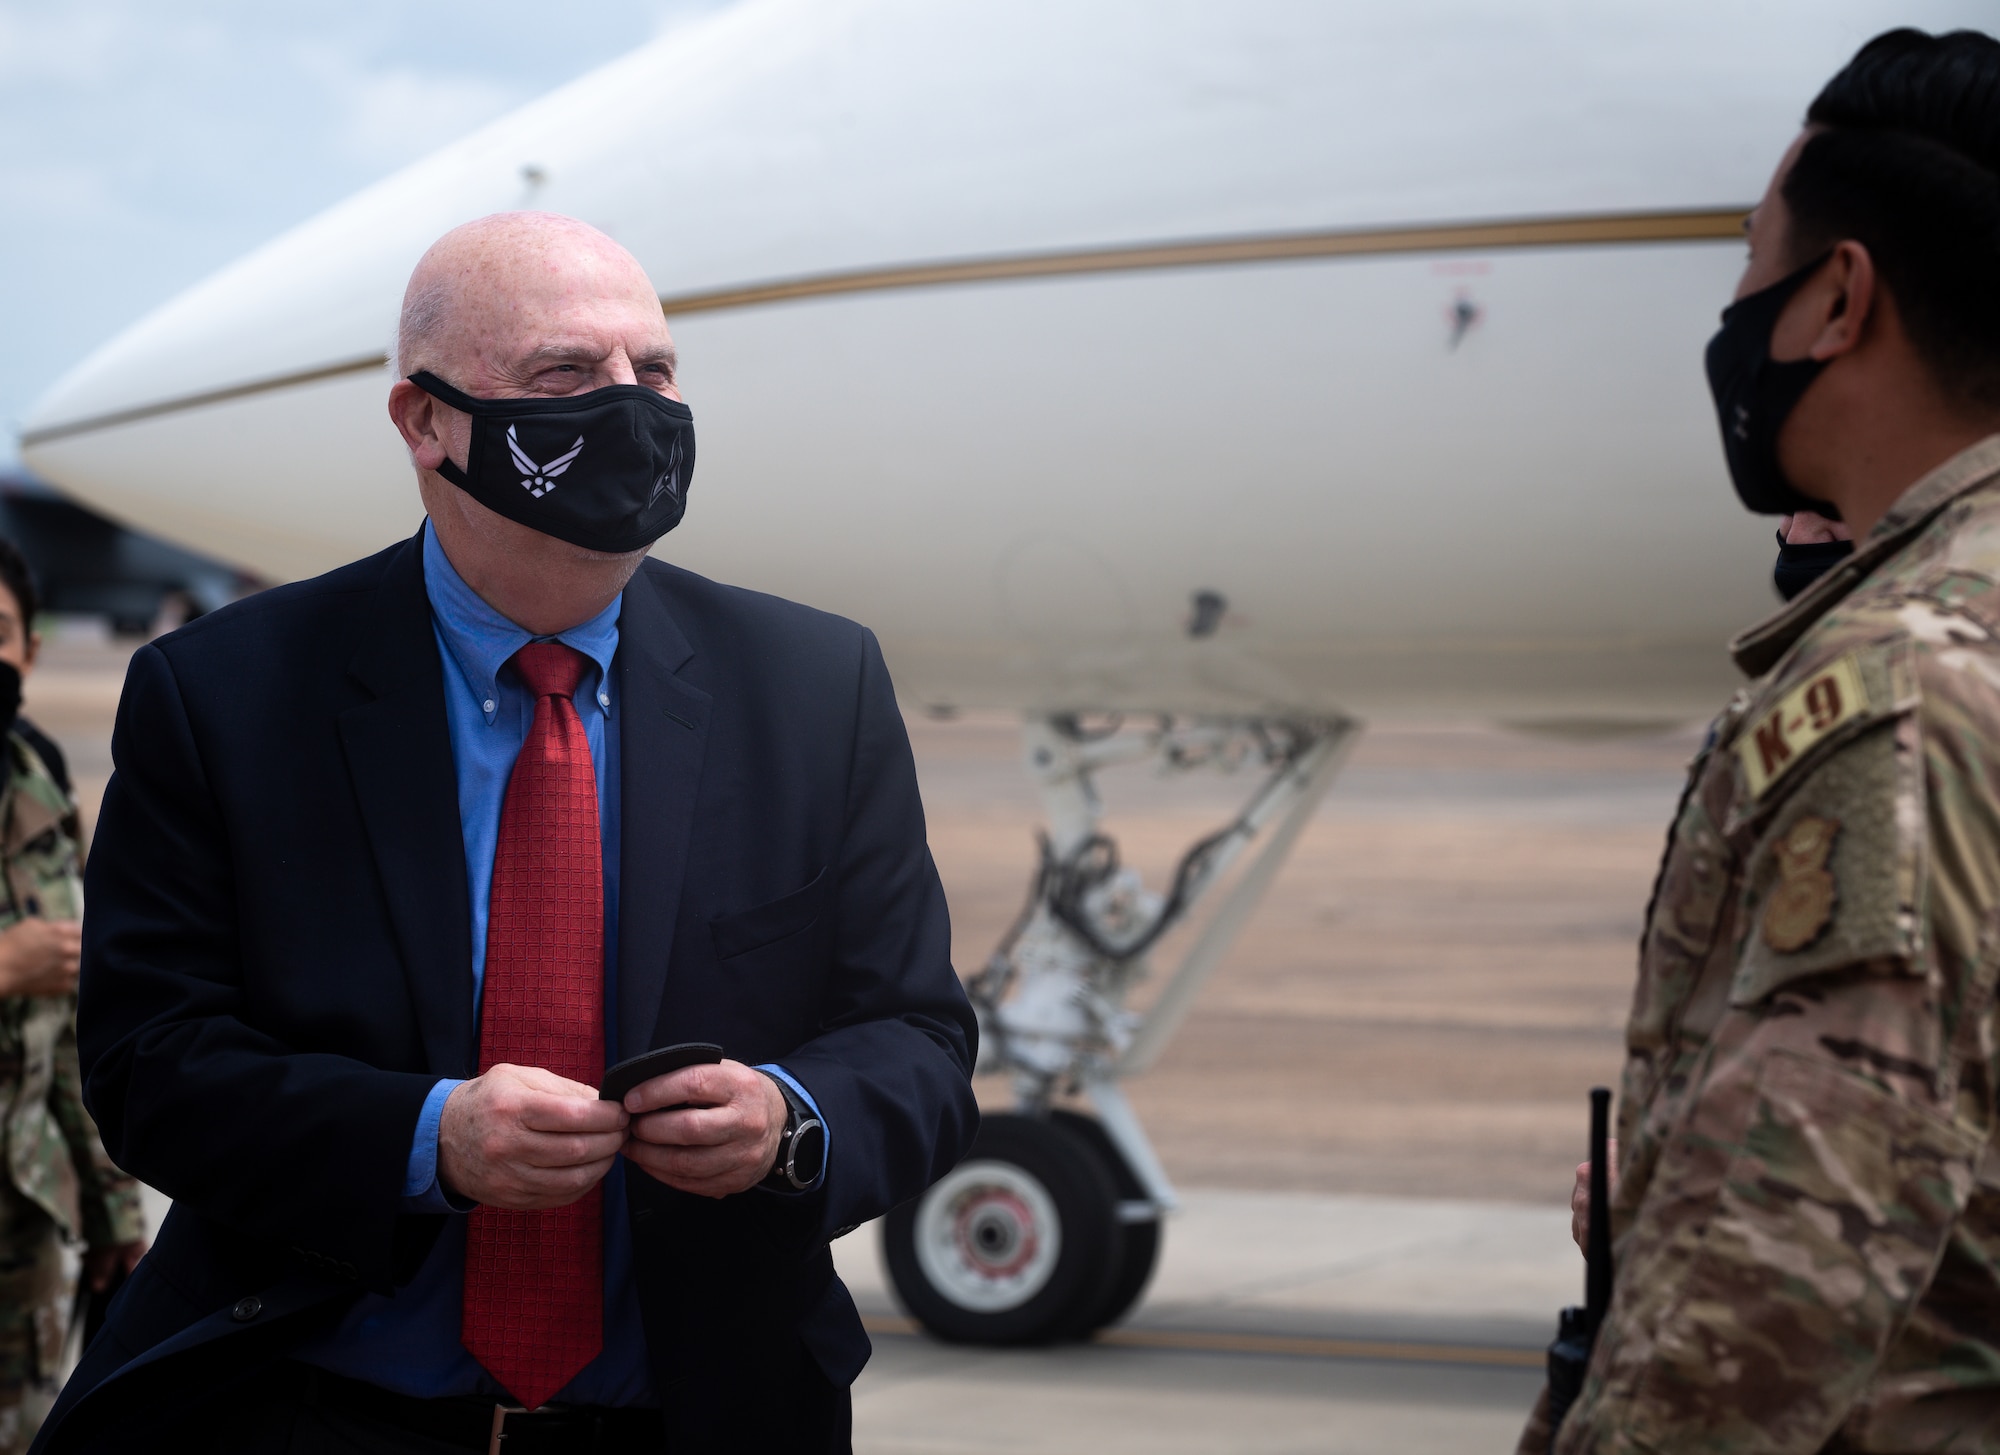 Honorable John P. Roth, acting Secretary of the Air Force, recieves a patch from Staff Sgt. Keola Miller, 2nd Security Force Squadron military working dog handler, during a tour at Barksdale Air Force Base, Louisiana, April 6, 2021.